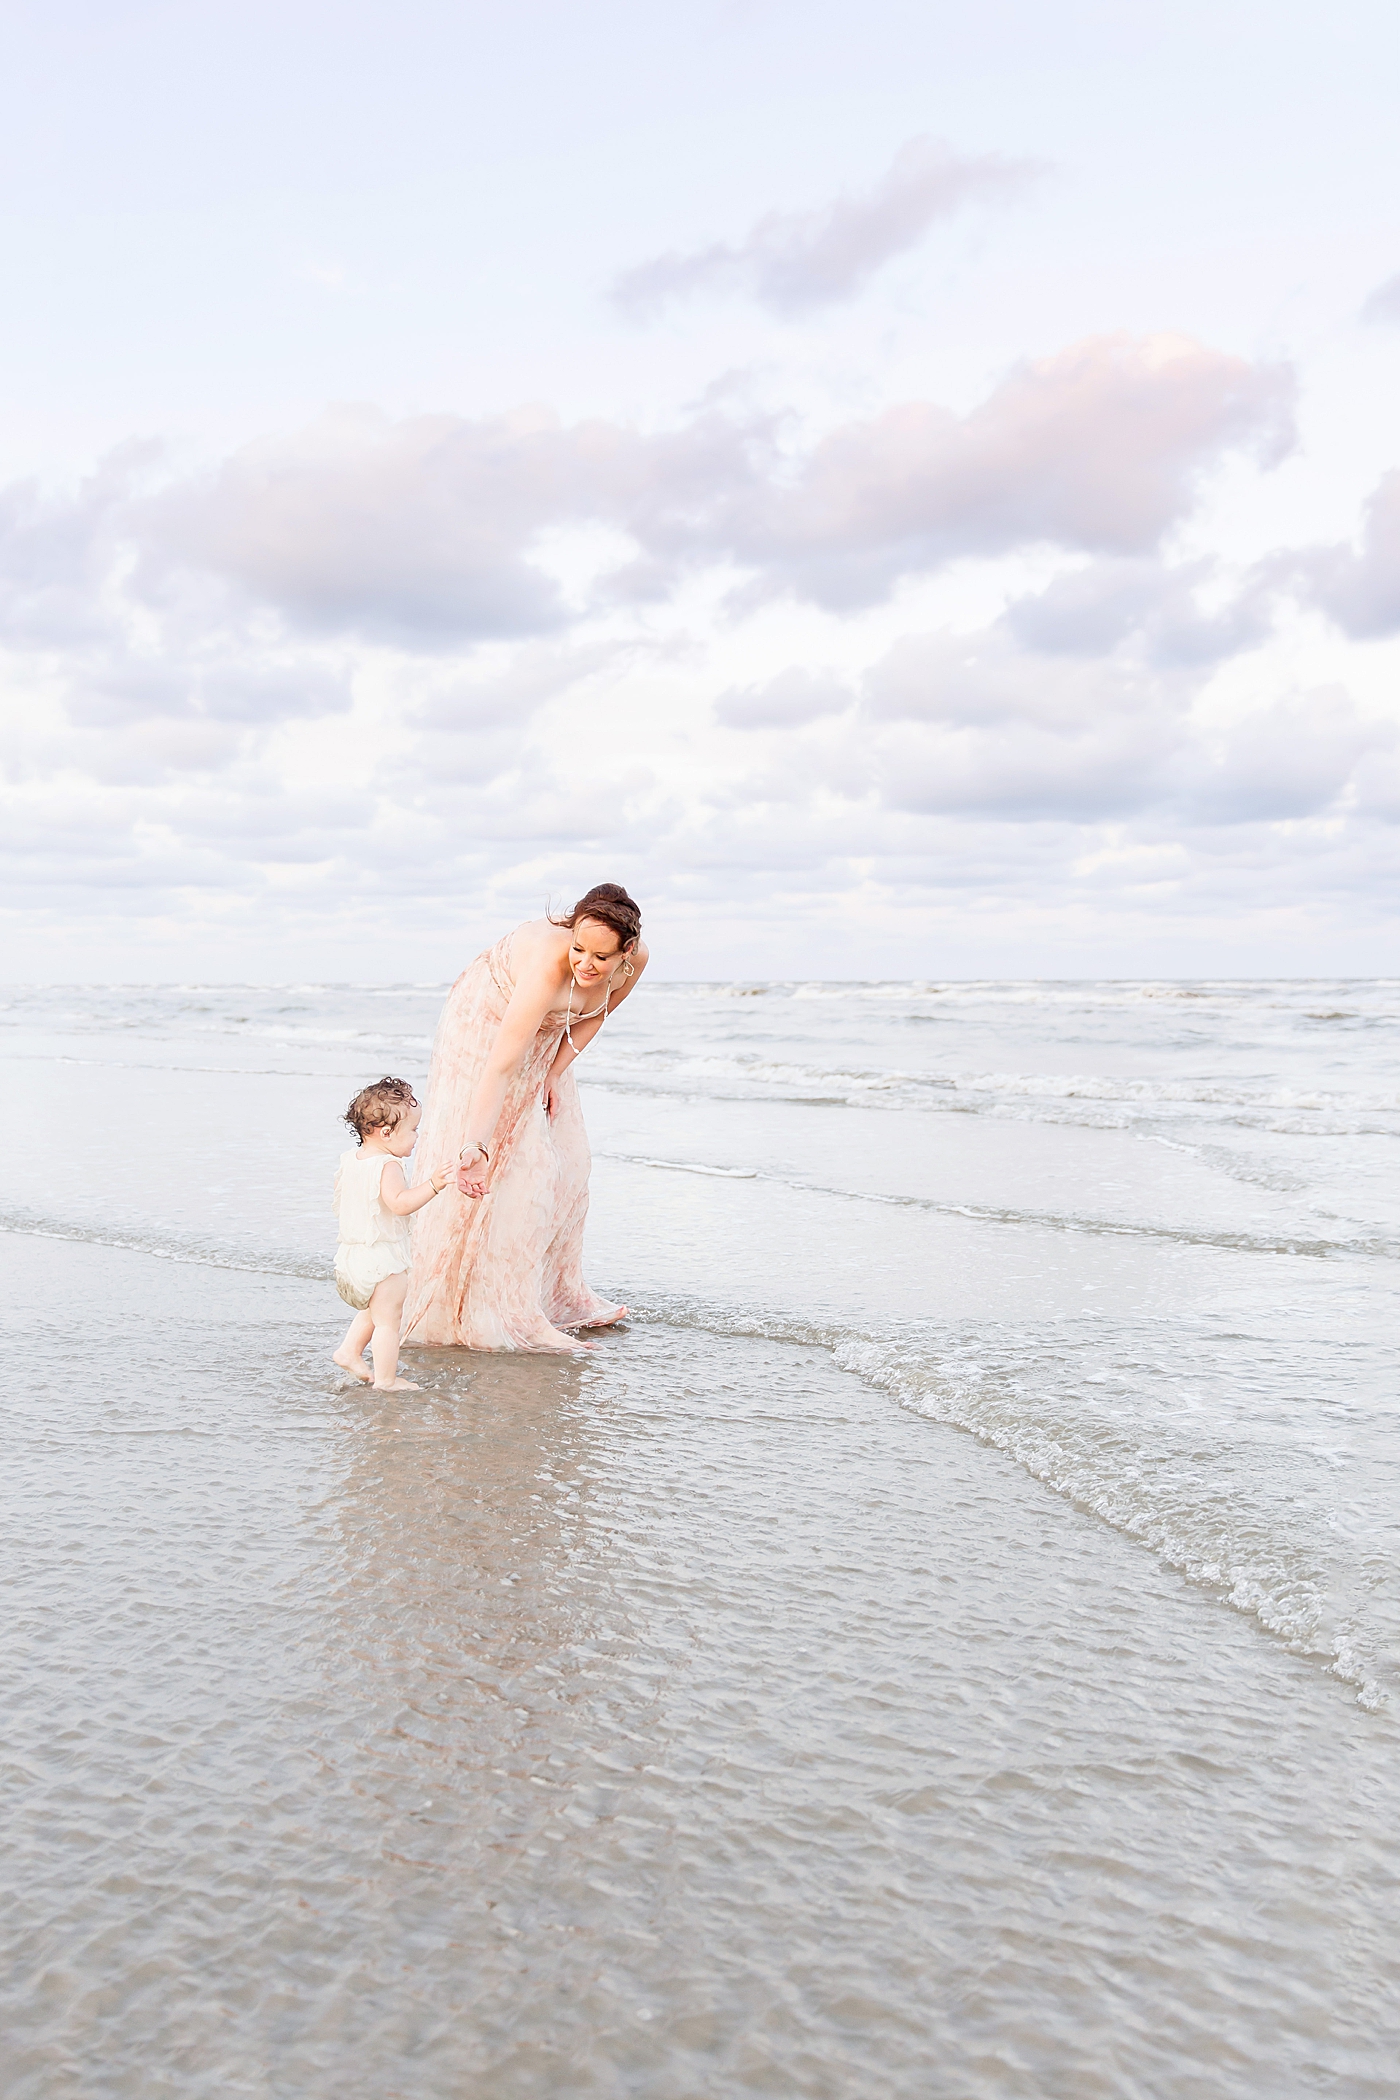 Mom and daughter on the beach. Photo by Fresh Light Photography.